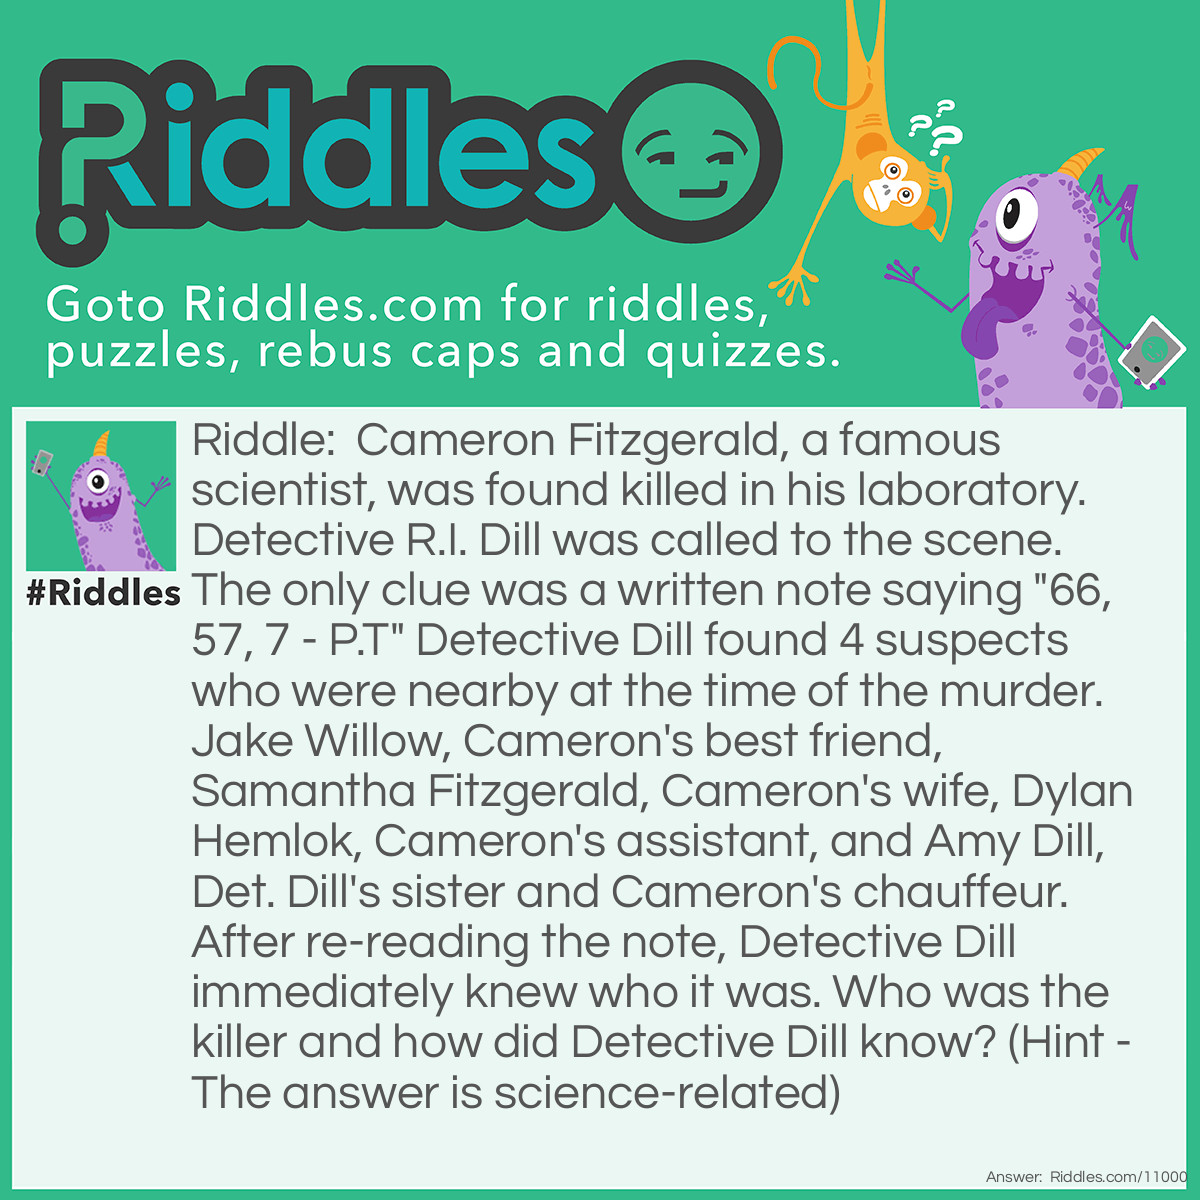 Riddle: Cameron Fitzgerald, a famous scientist, was found killed in his laboratory. Detective R.I. Dill was called to the scene. The only clue was a written note saying "66, 57, 7 - P.T" Detective Dill found 4 suspects who were nearby at the time of the murder. Jake Willow, Cameron's best friend, Samantha Fitzgerald, Cameron's wife, Dylan Hemlok, Cameron's assistant, and Amy Dill, Det. Dill's sister and Cameron's chauffeur. After re-reading the note, Detective Dill immediately knew who it was. Who was the killer and how did Detective Dill know? (Hint - The answer is science-related) Answer: It was Dylan. The note was referring to the periodic table of elements, a.k.a 'P.T' The numbers 66, 57 and 7 are (in order): Dysprosium, Lanthanum and Nitrogen. Dysprosium is symbolized by 'Dy', Lanthanum for 'La' and Nitrogen is 'N'.